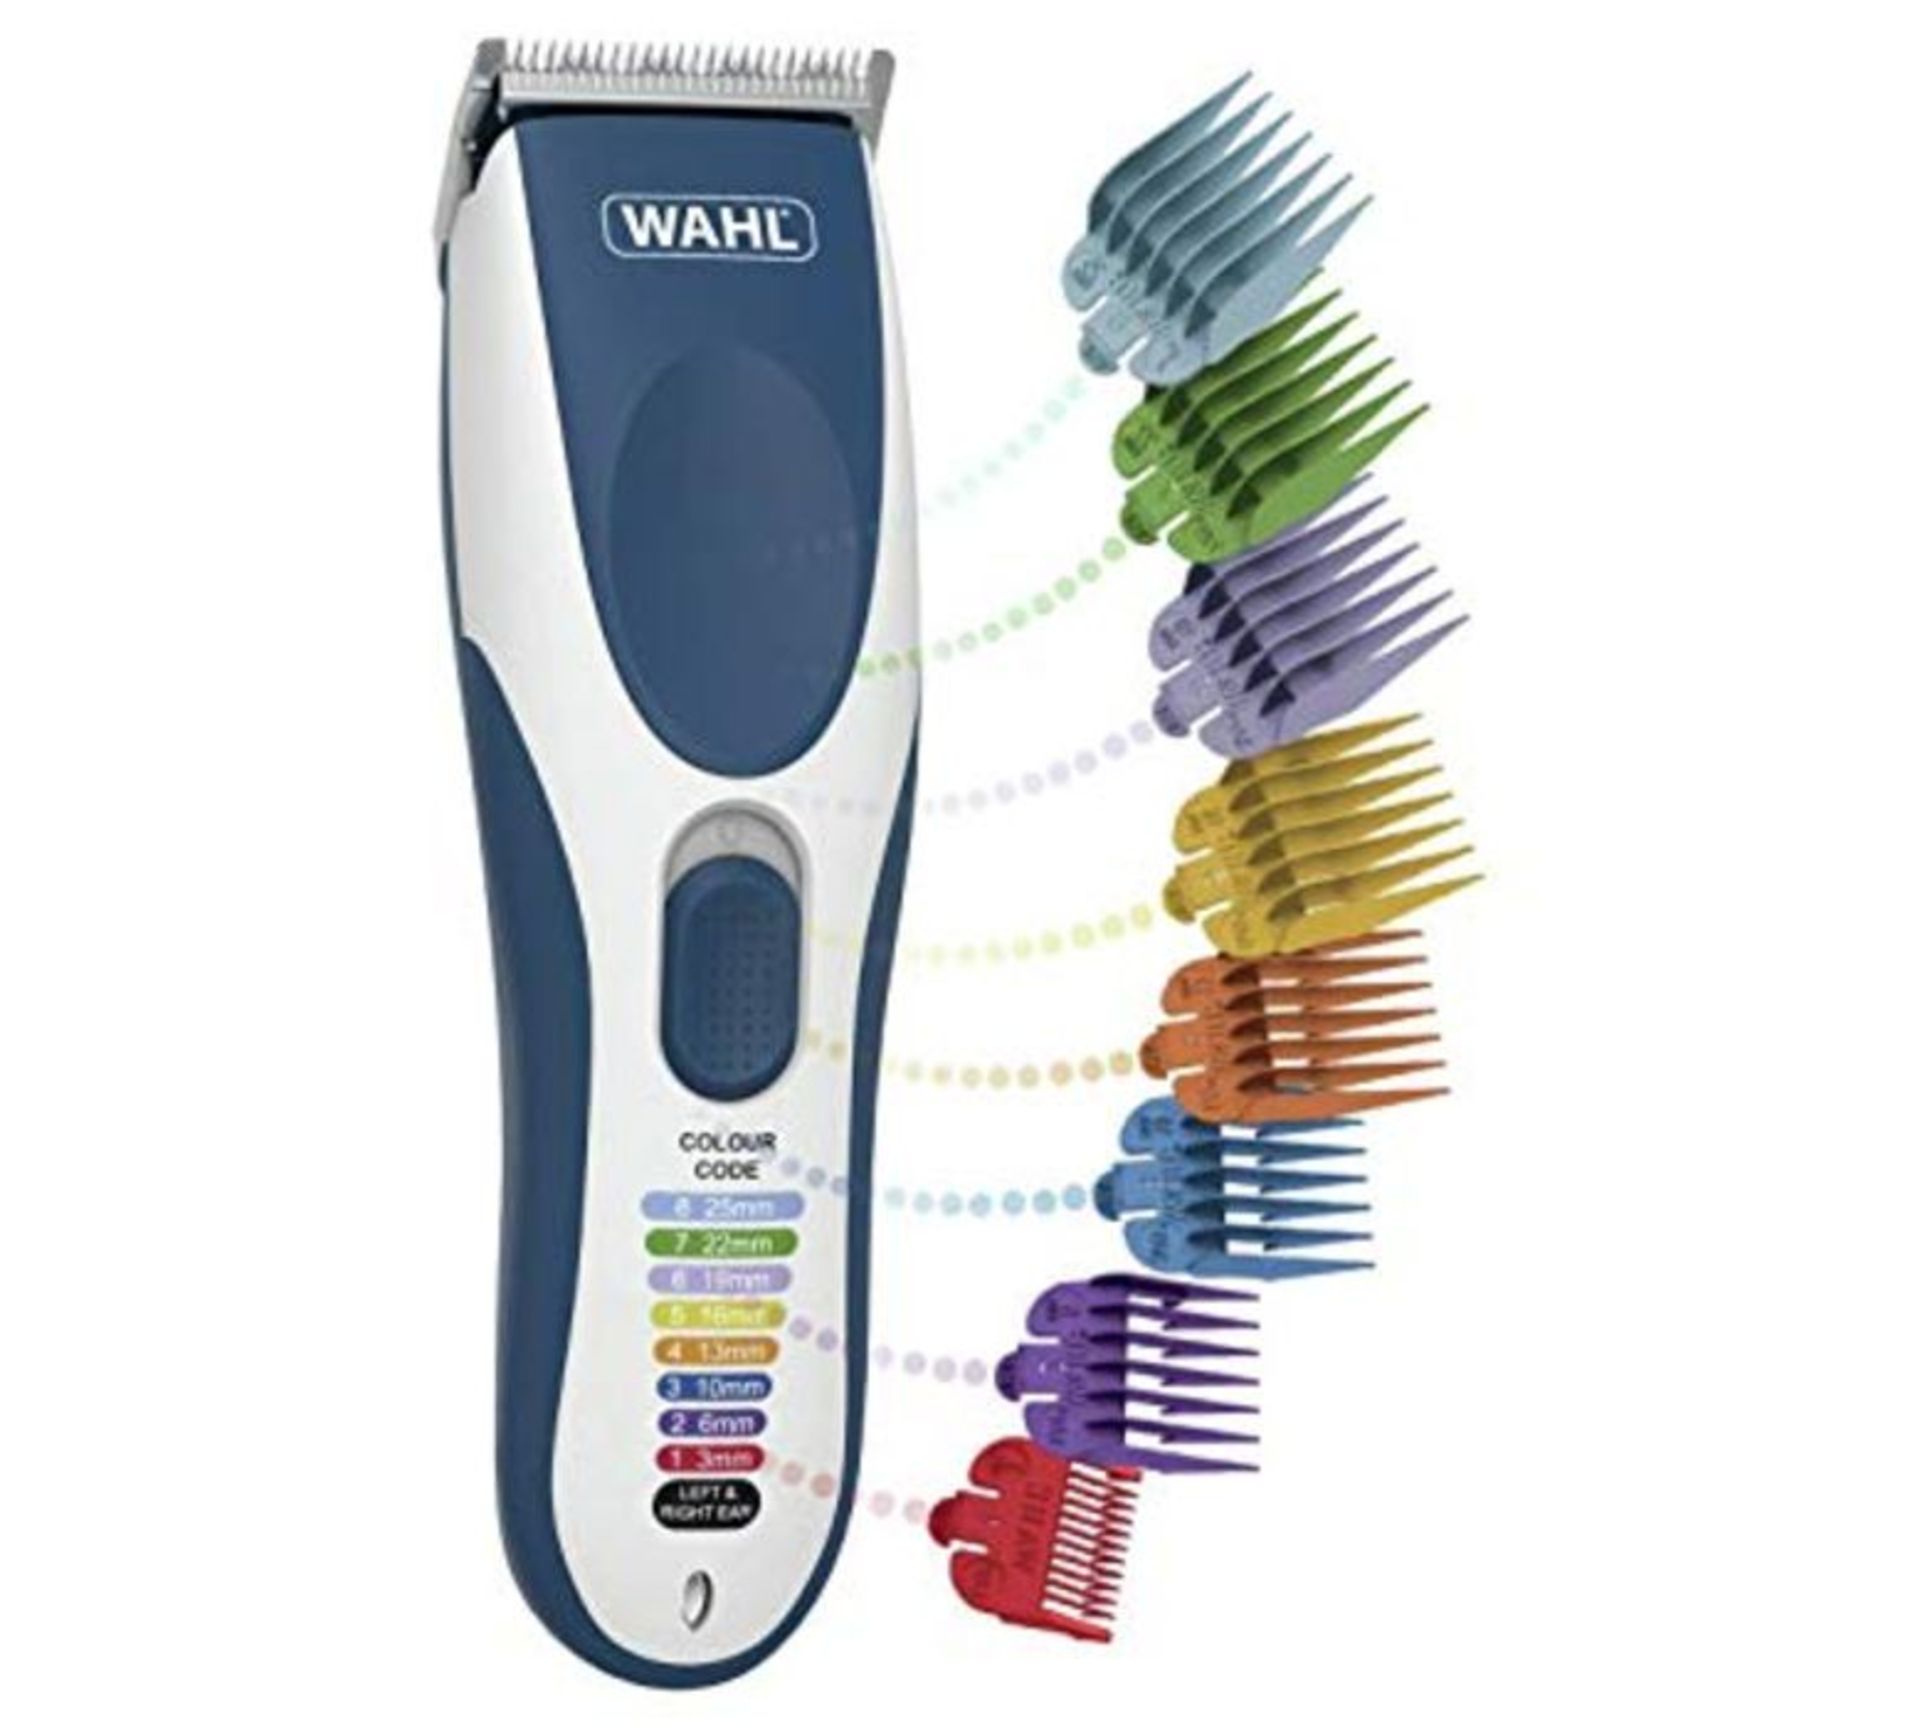 Wahl Hair Clippers for Men, Colour Pro Cordless Head Shaver Men's Hair Clippers with C